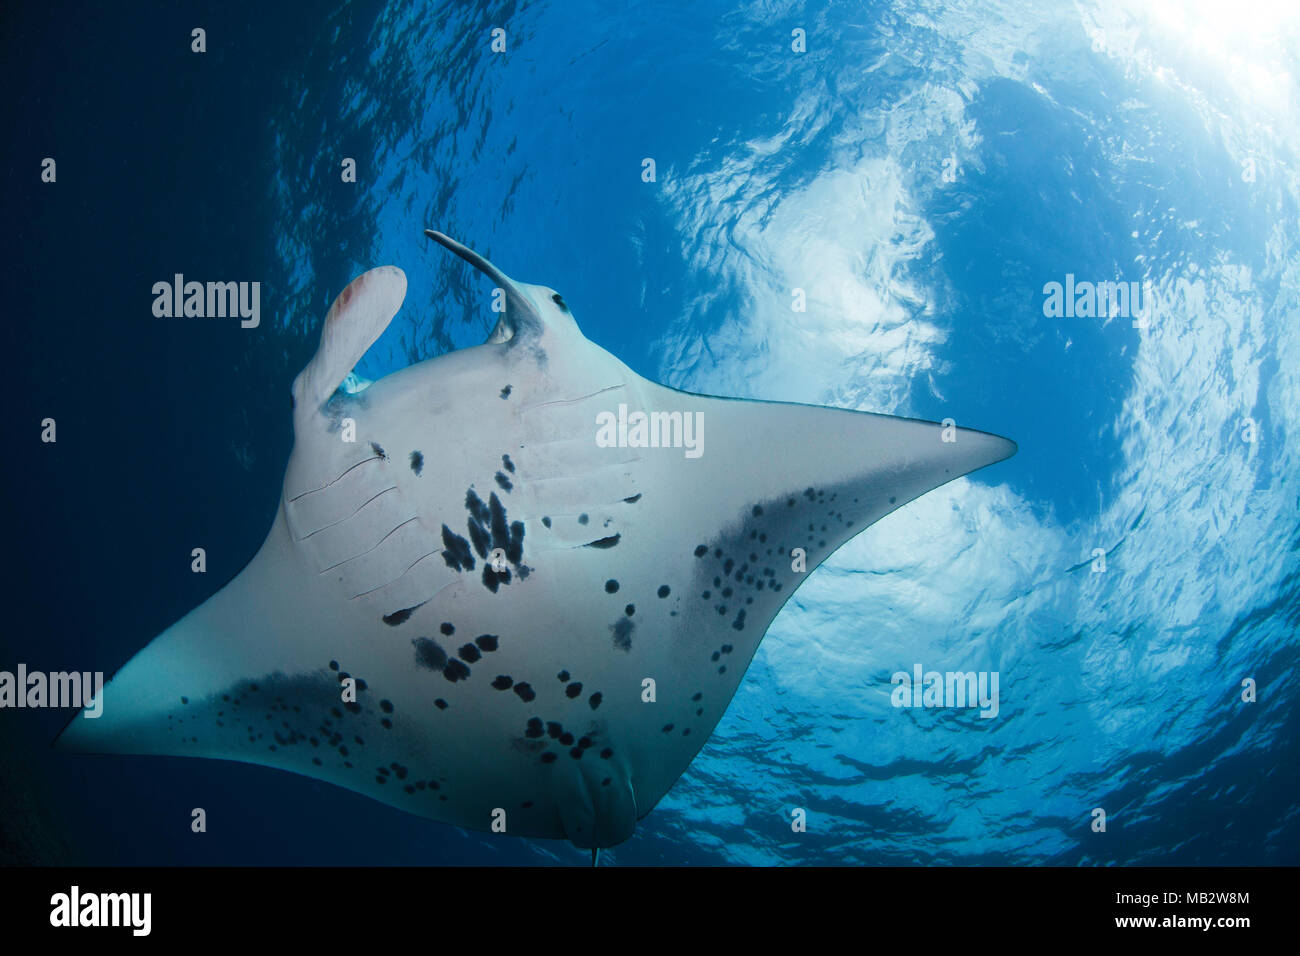 A view from below of a reef manta ray, Manta alfredi, over a shallow reef off Ukumehame, Maui, Hawaii. Stock Photo